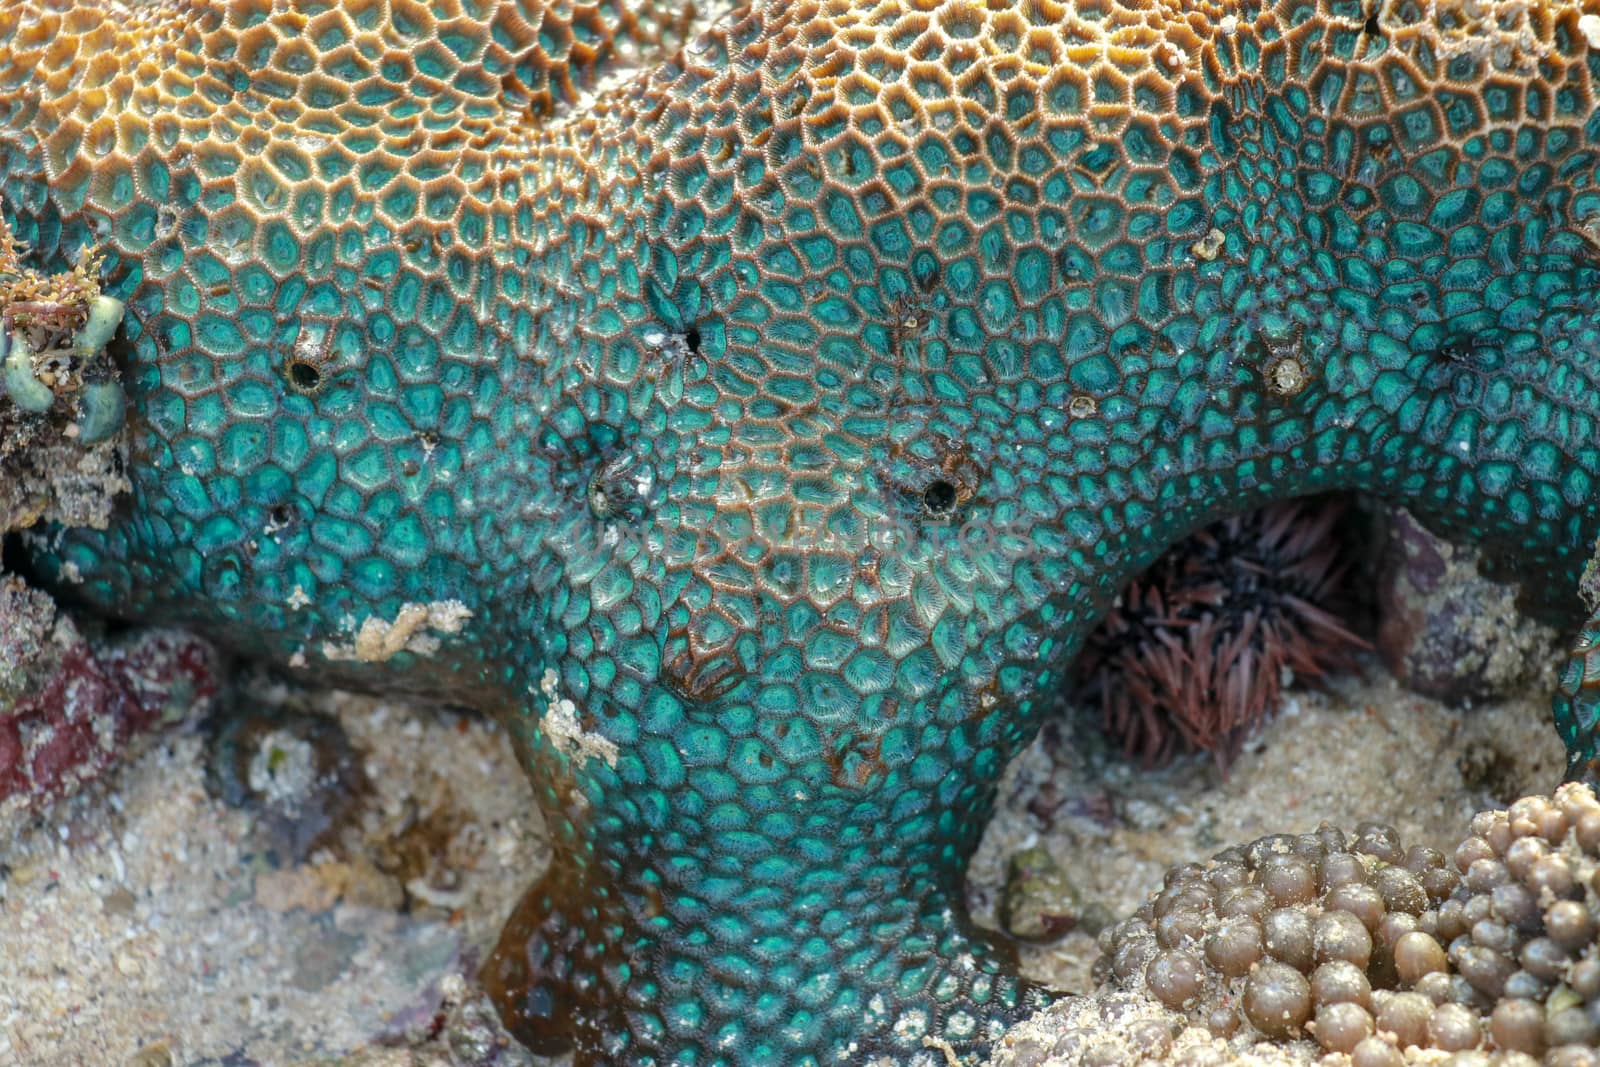 This is a turquoise favia coral with bright blue eyes during low tide.